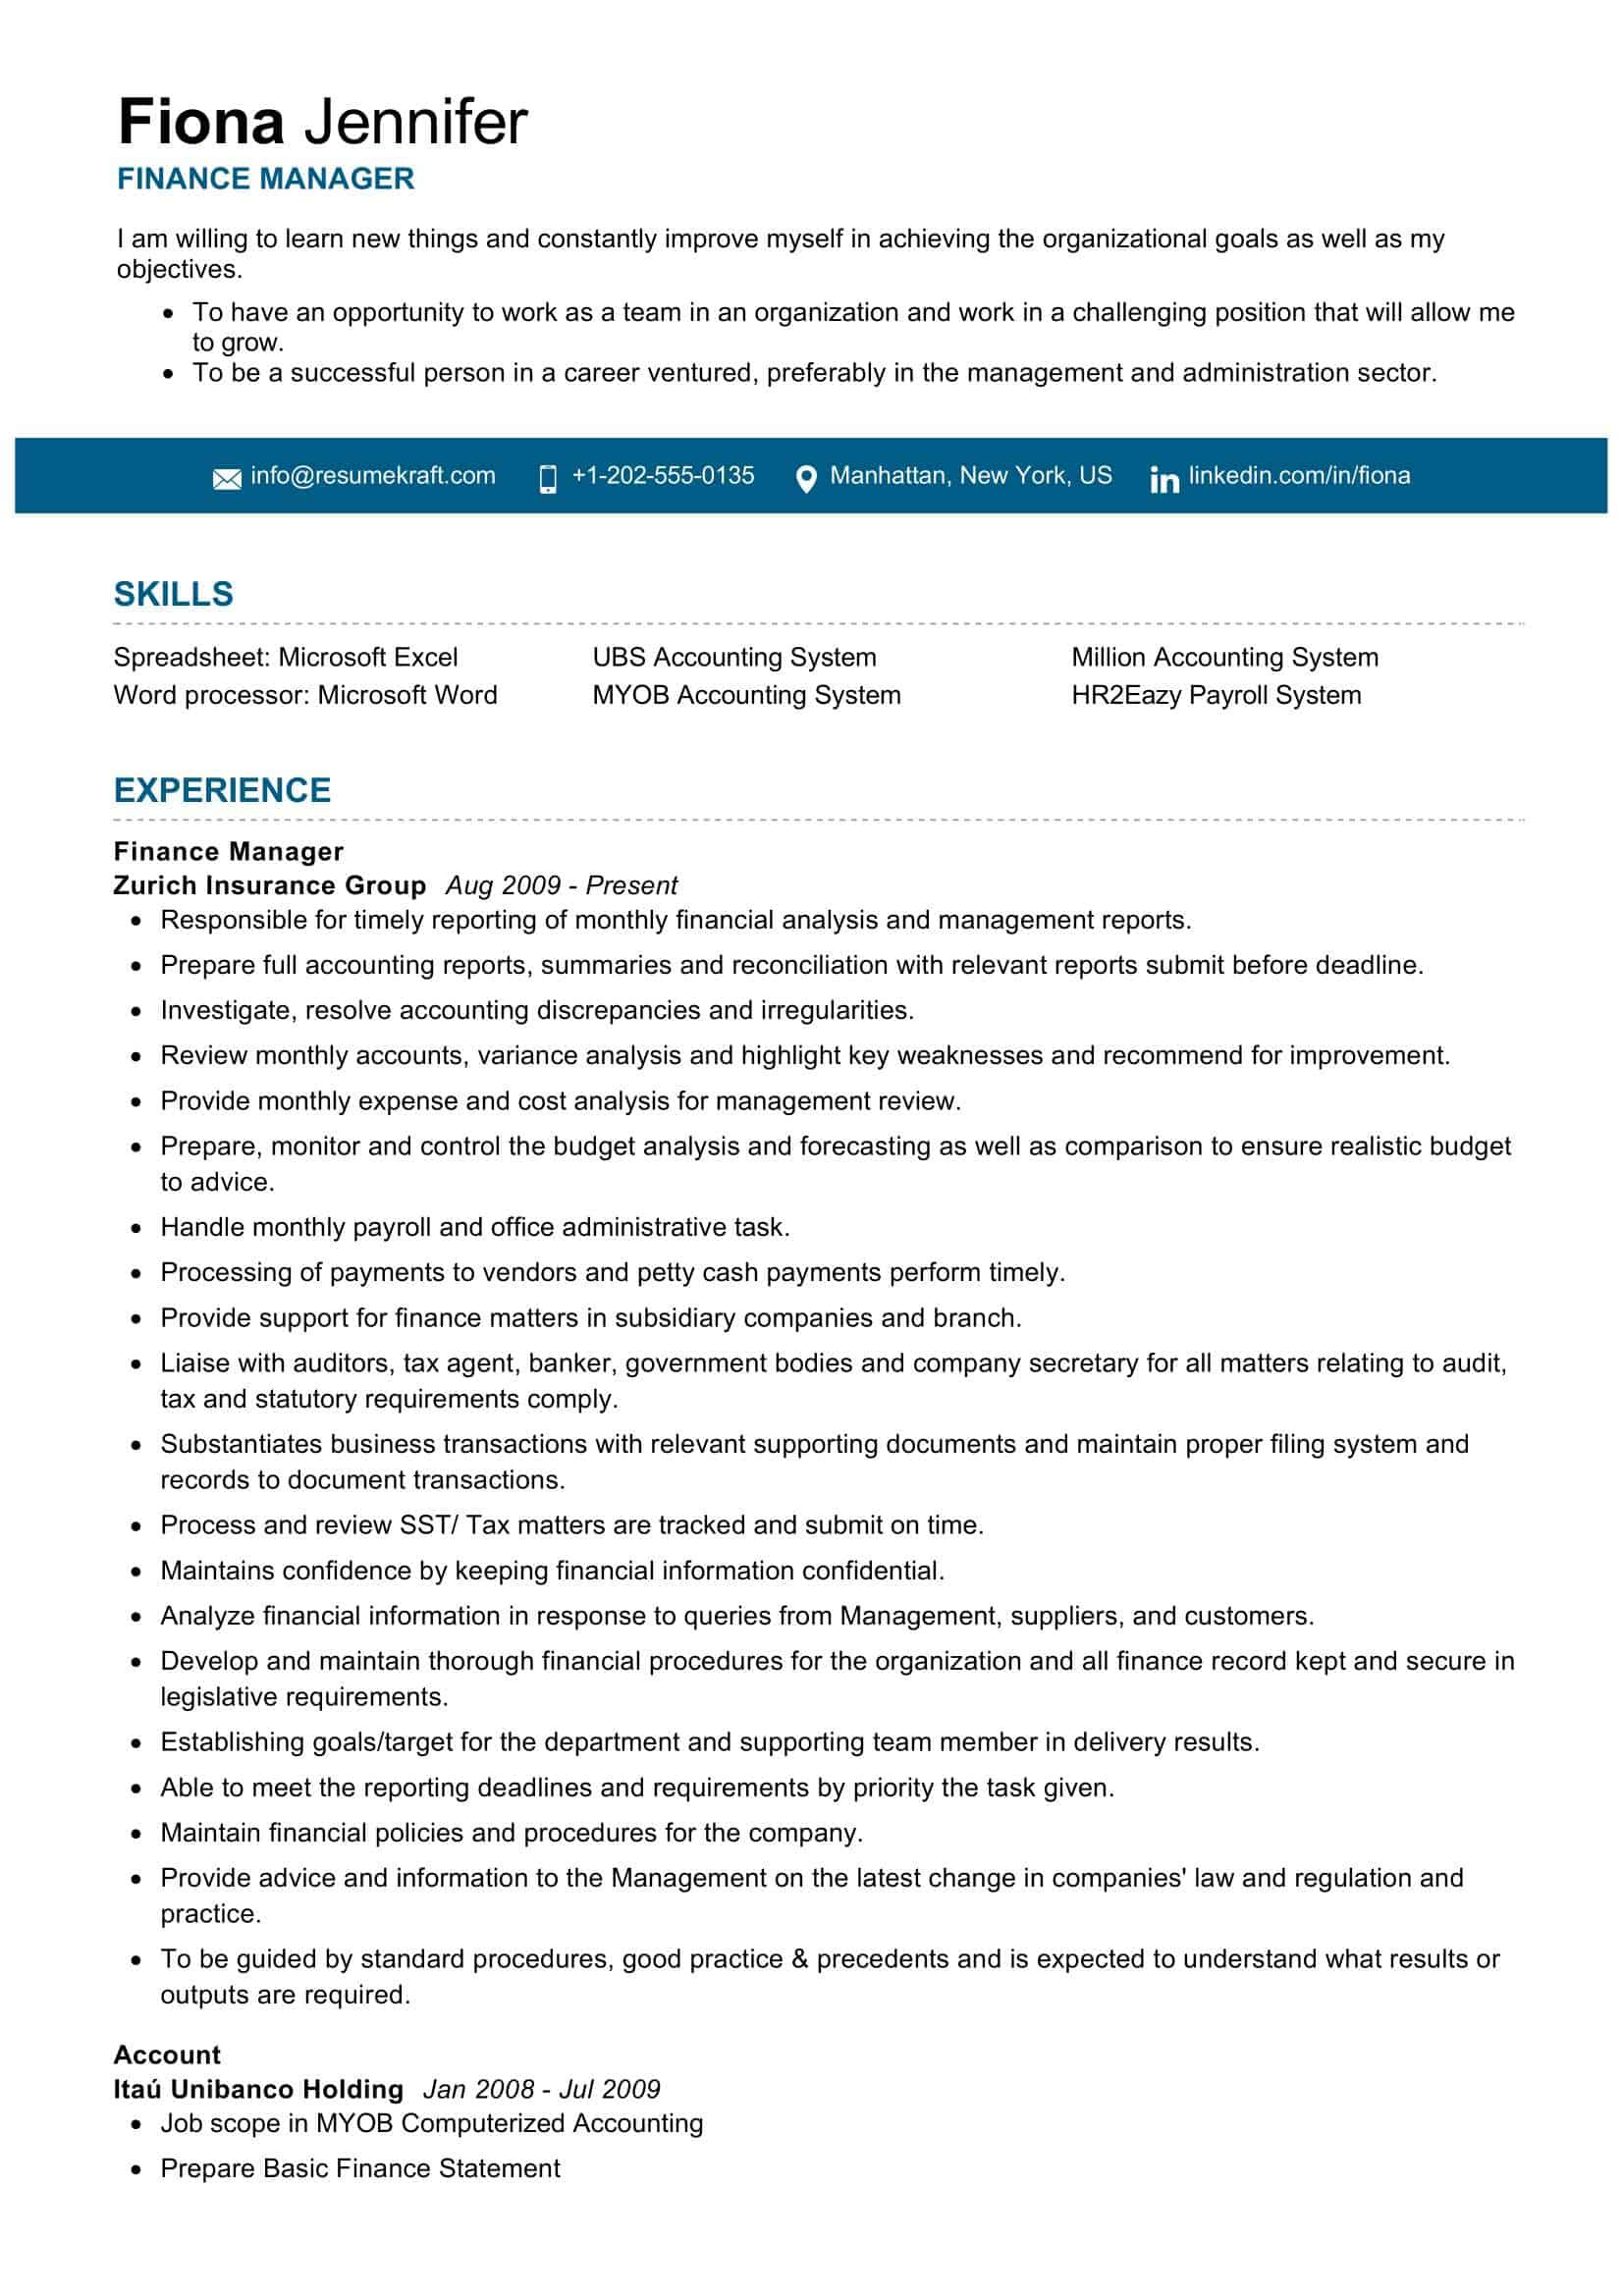 Resume Samples In Finance and Accounting Finance Manager Resume Sample 2022 Writing Tips – Resumekraft